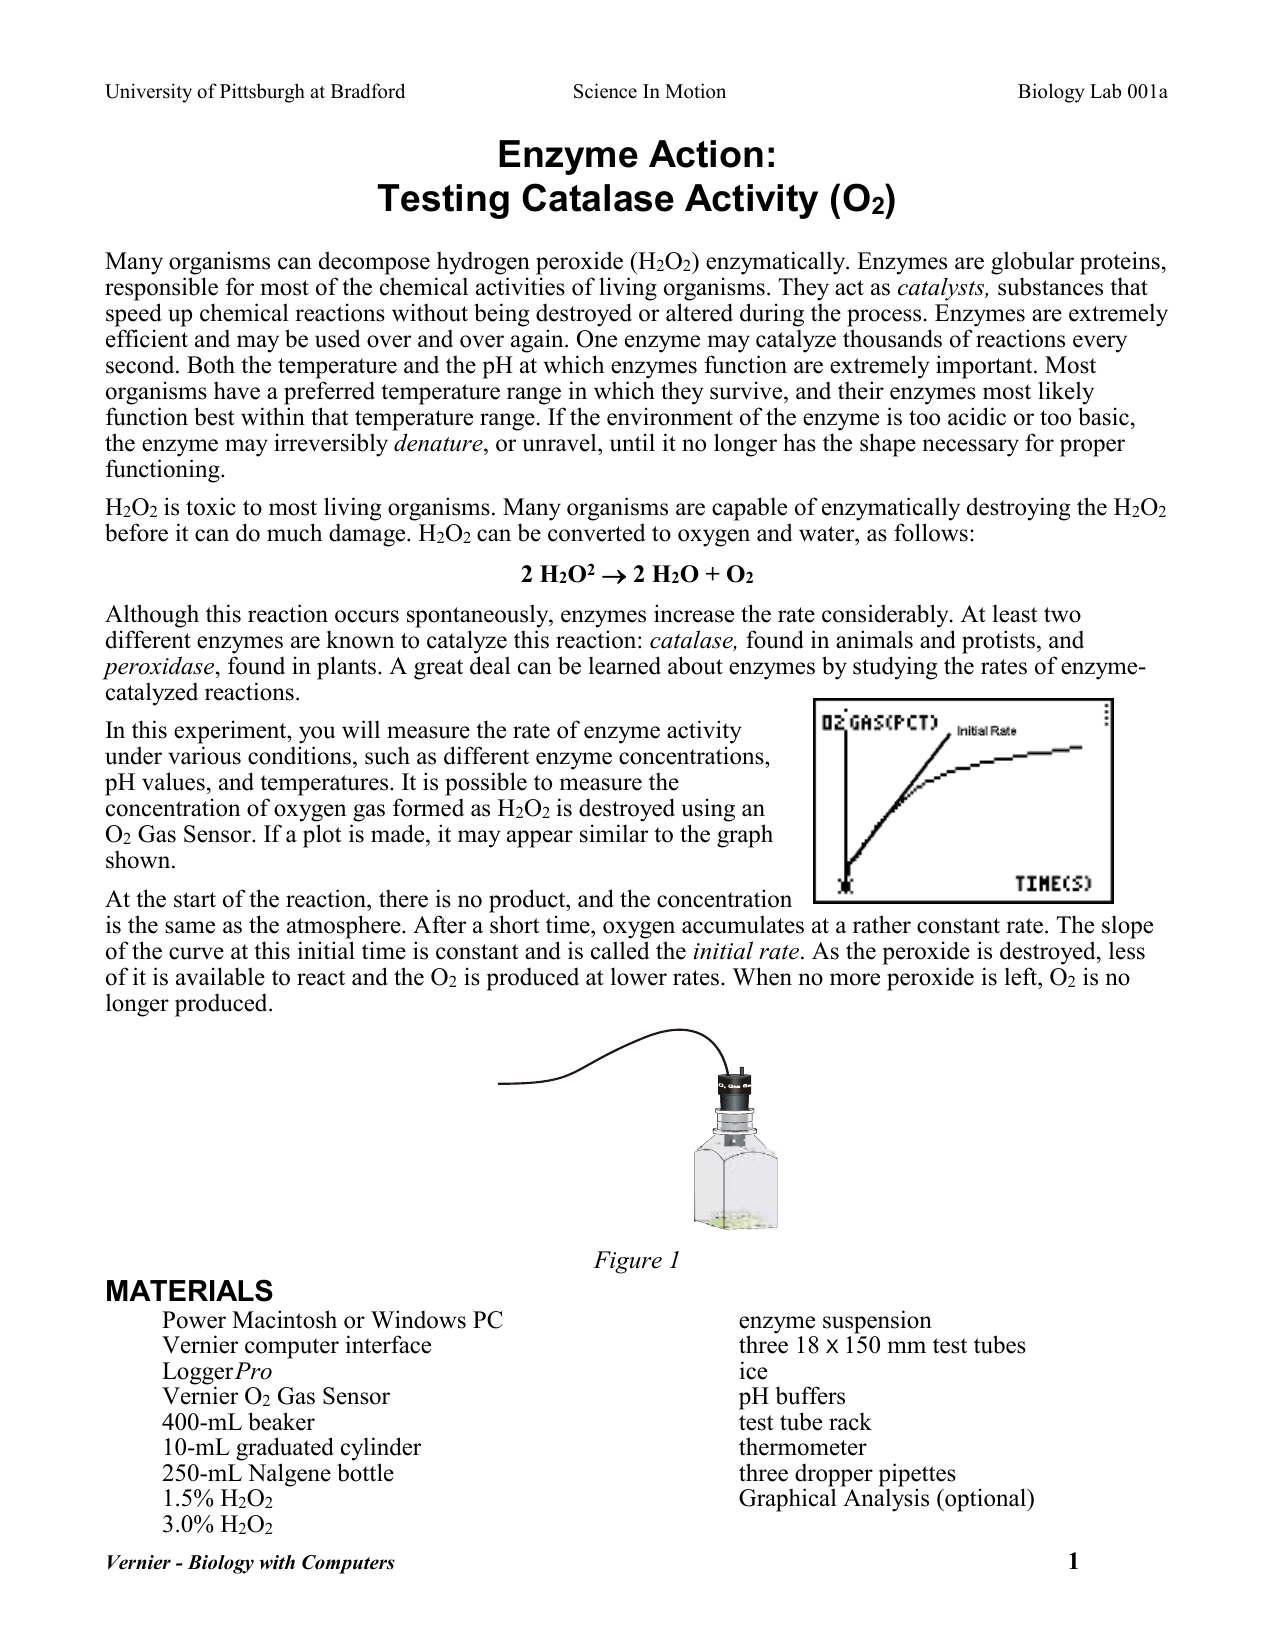 a case study catalase activity answers